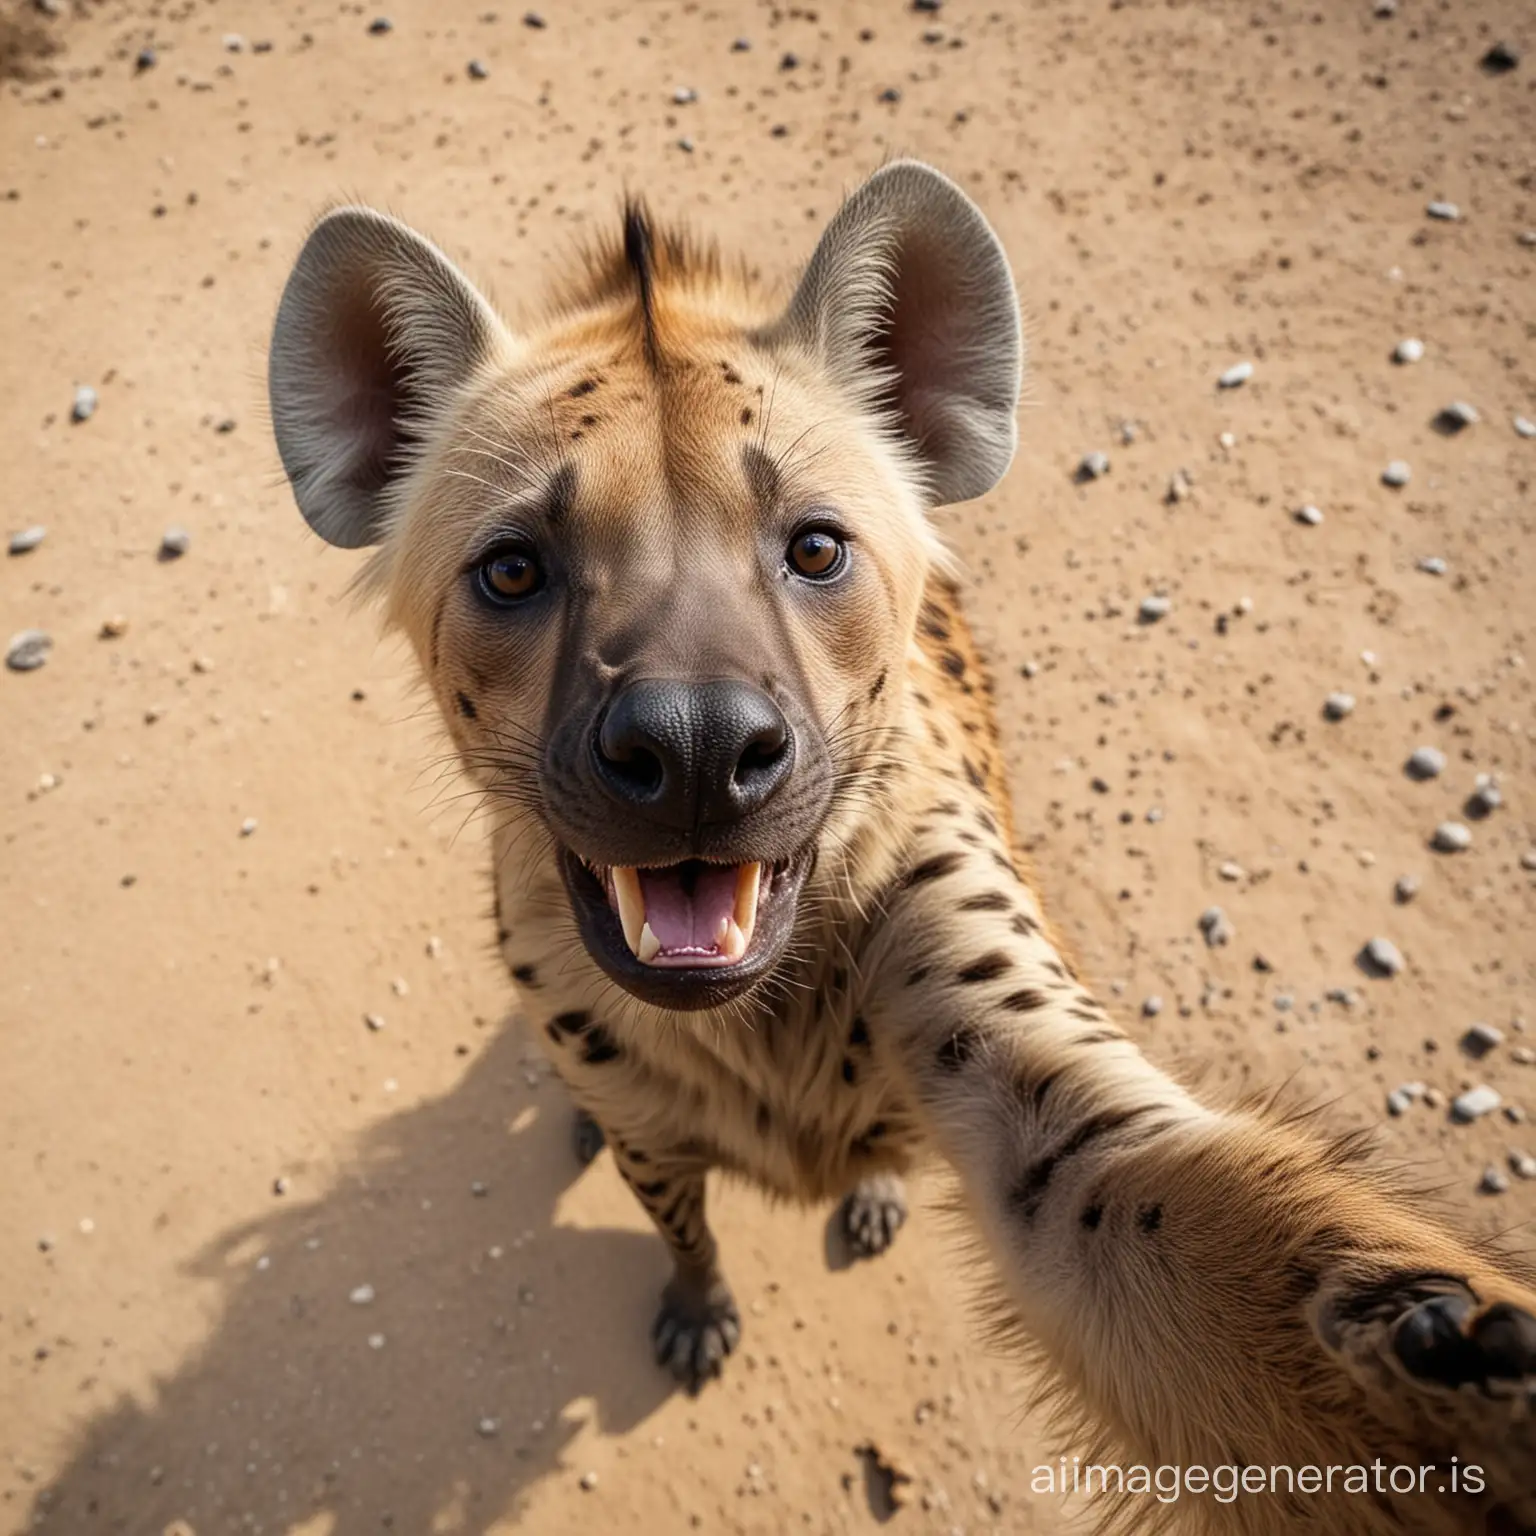 Hyena-Selfie-Captured-from-an-Aerial-Perspective-with-Realistic-Detail